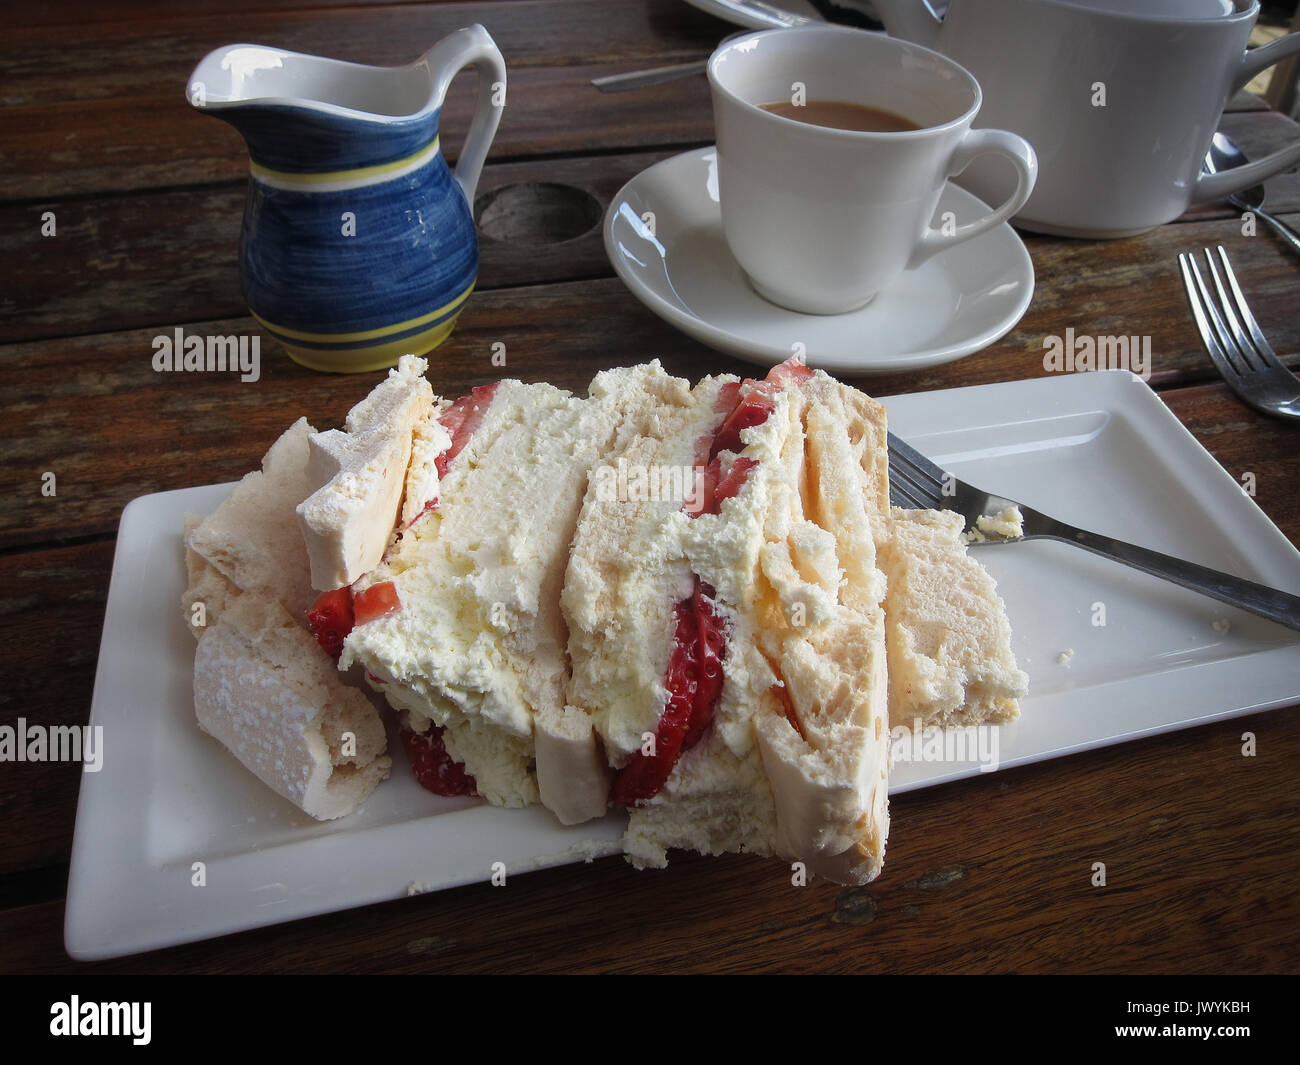 Delicious meringue, cream and strawberry cake served for an afternoon tea at Battlers Green Farm's The Bull Pen Tea Room, near Radlett, Herts England. Stock Photo